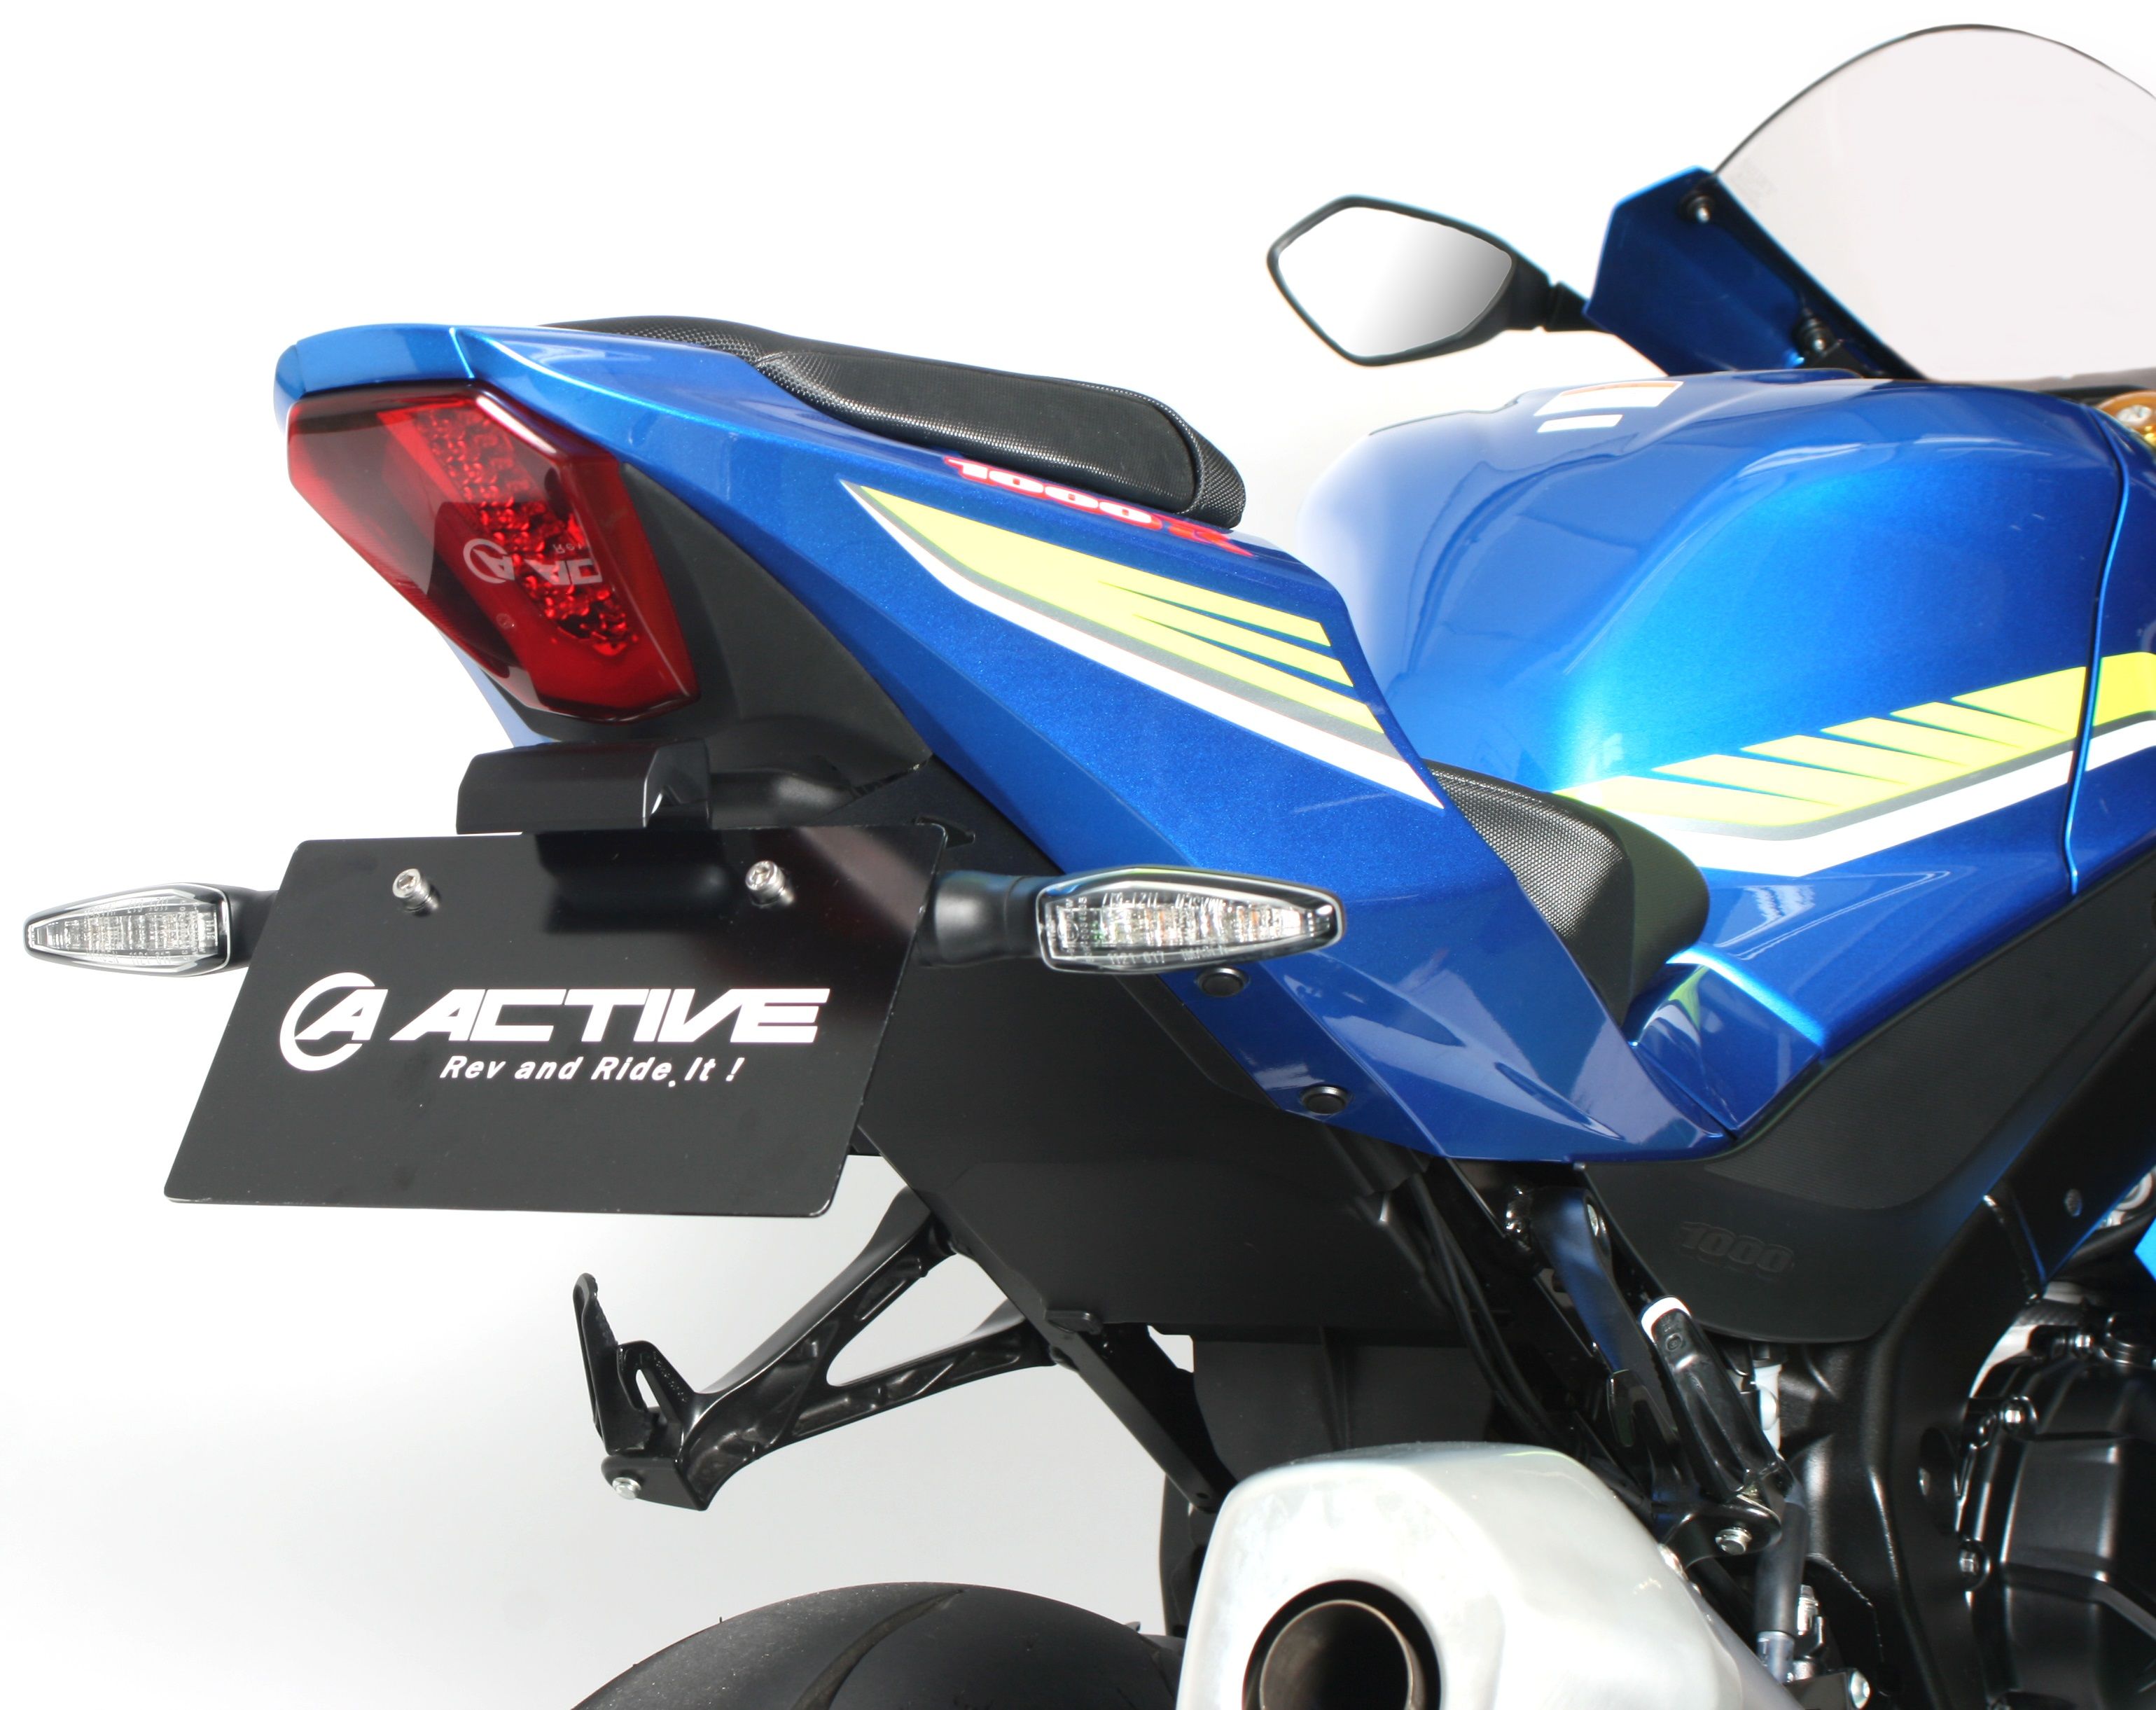 ACTIVE アクティブ フェンダーレスキット 1155040 SUZUKI GSXR1000 (ABS) 17-19/GSXR1000R (ABS) 17-20